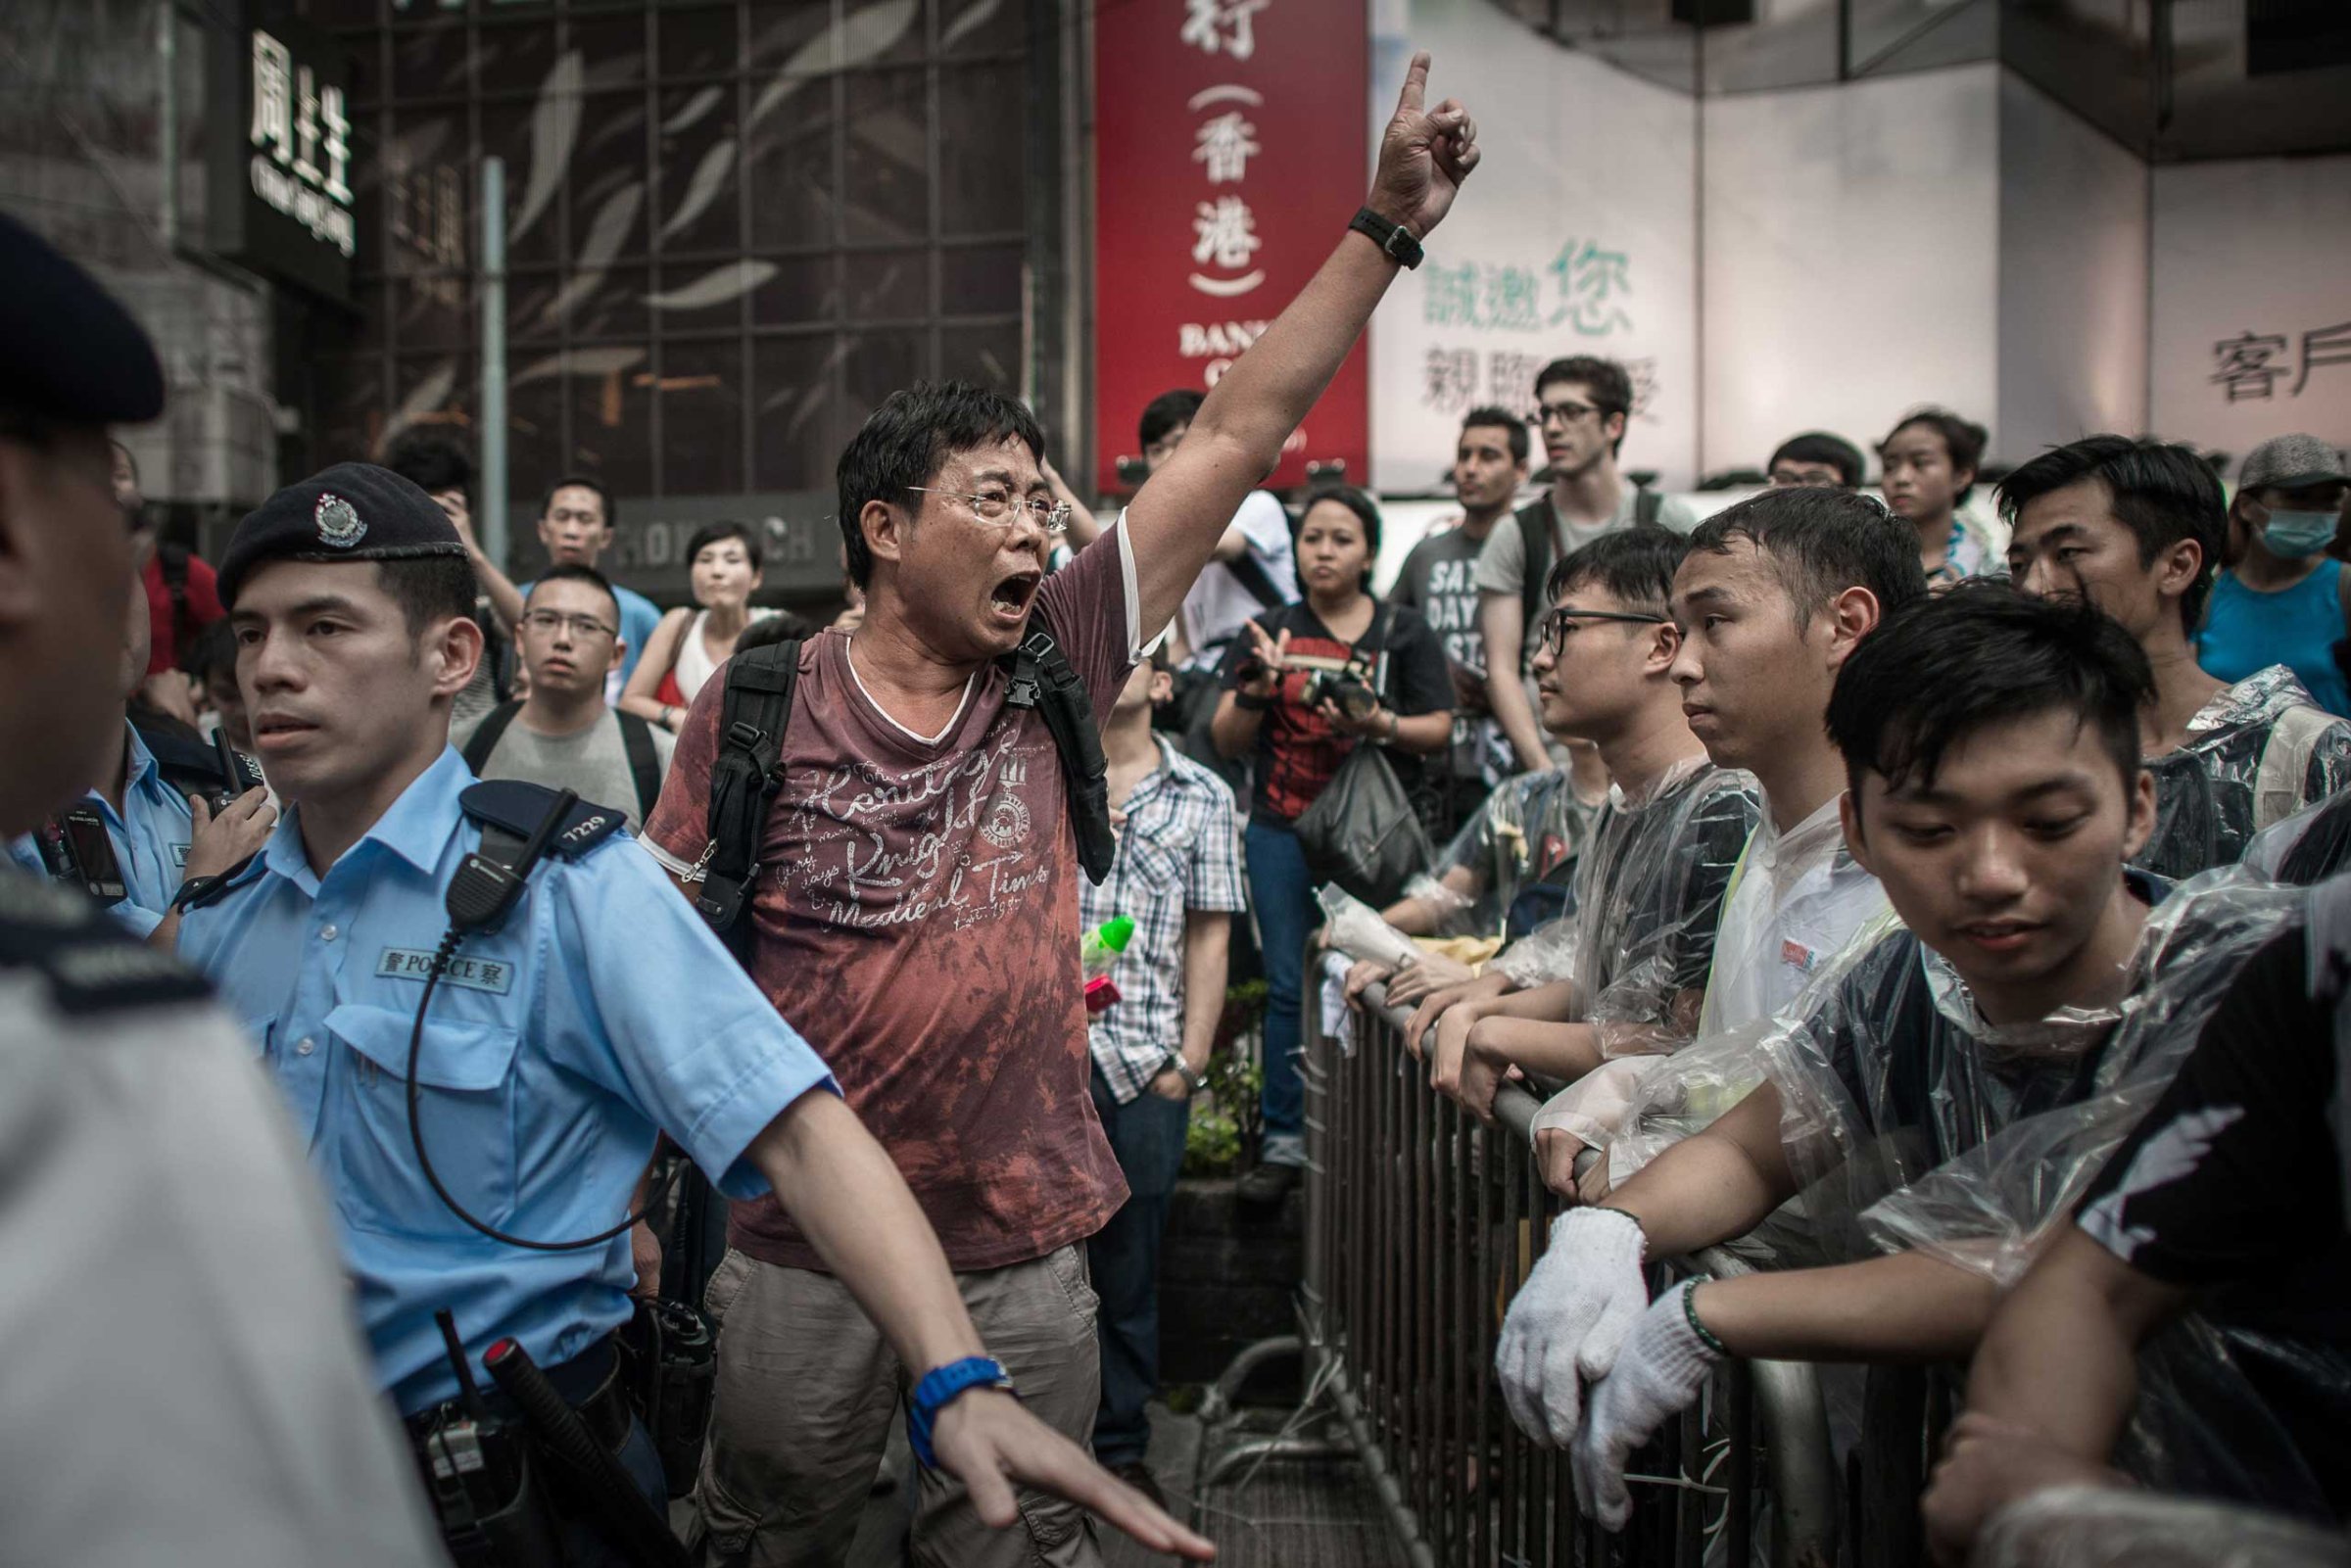 An anti-Occupy protester shouts at pro-democracy demonstrators in an occupied area of Hong Kong on Oct. 3, 2014.